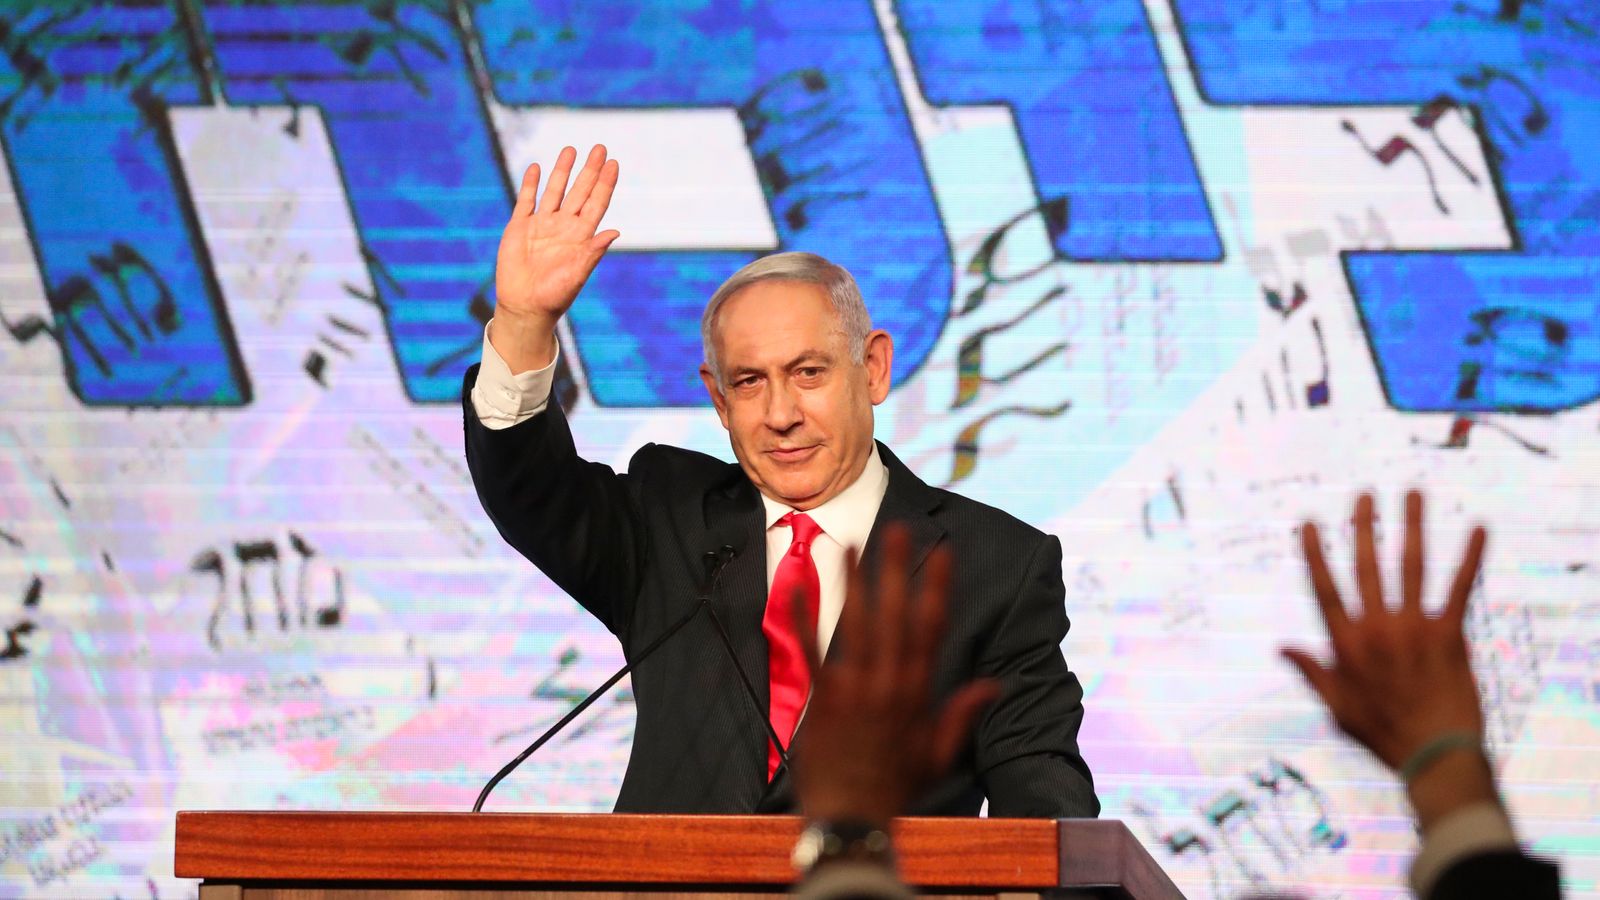 End of the road for Netanyahu – the man they call ‘the magician’ has run out of tricks